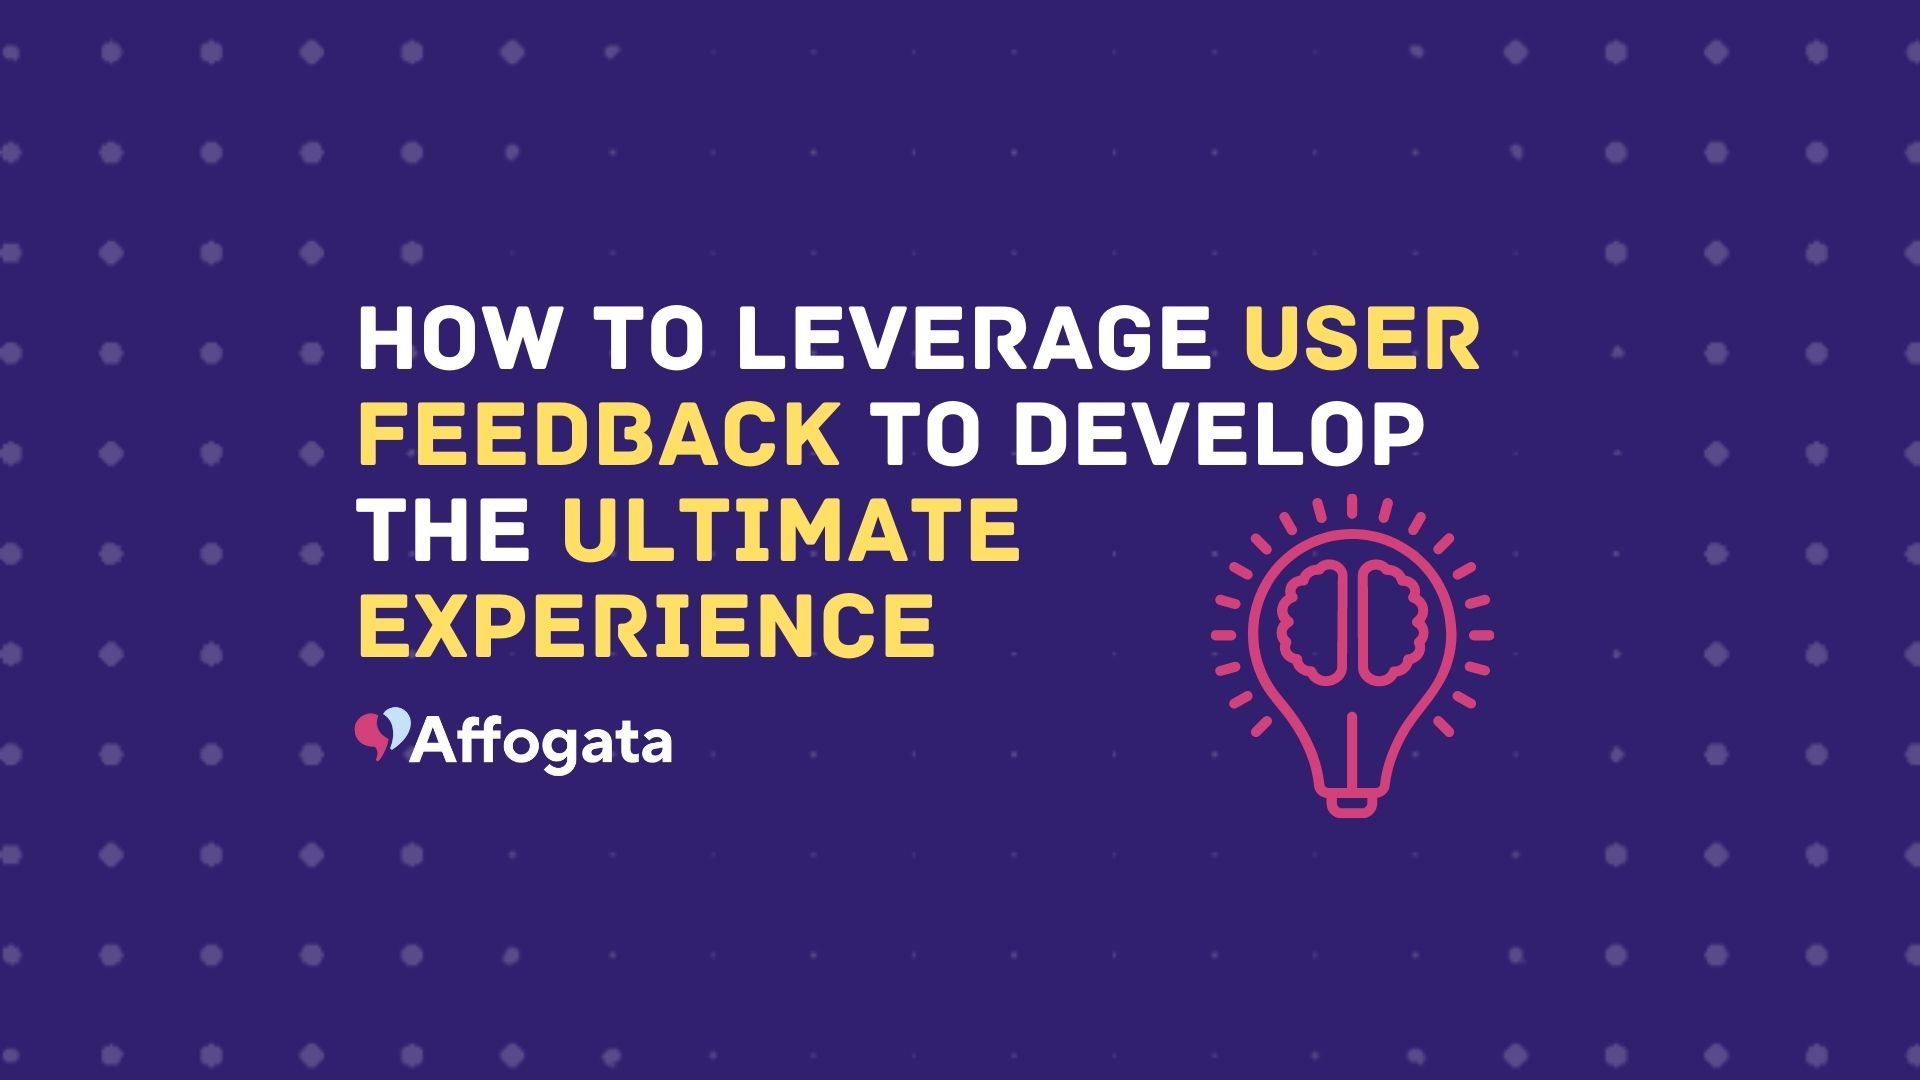 Leverage user experience to develop the ultimate experience